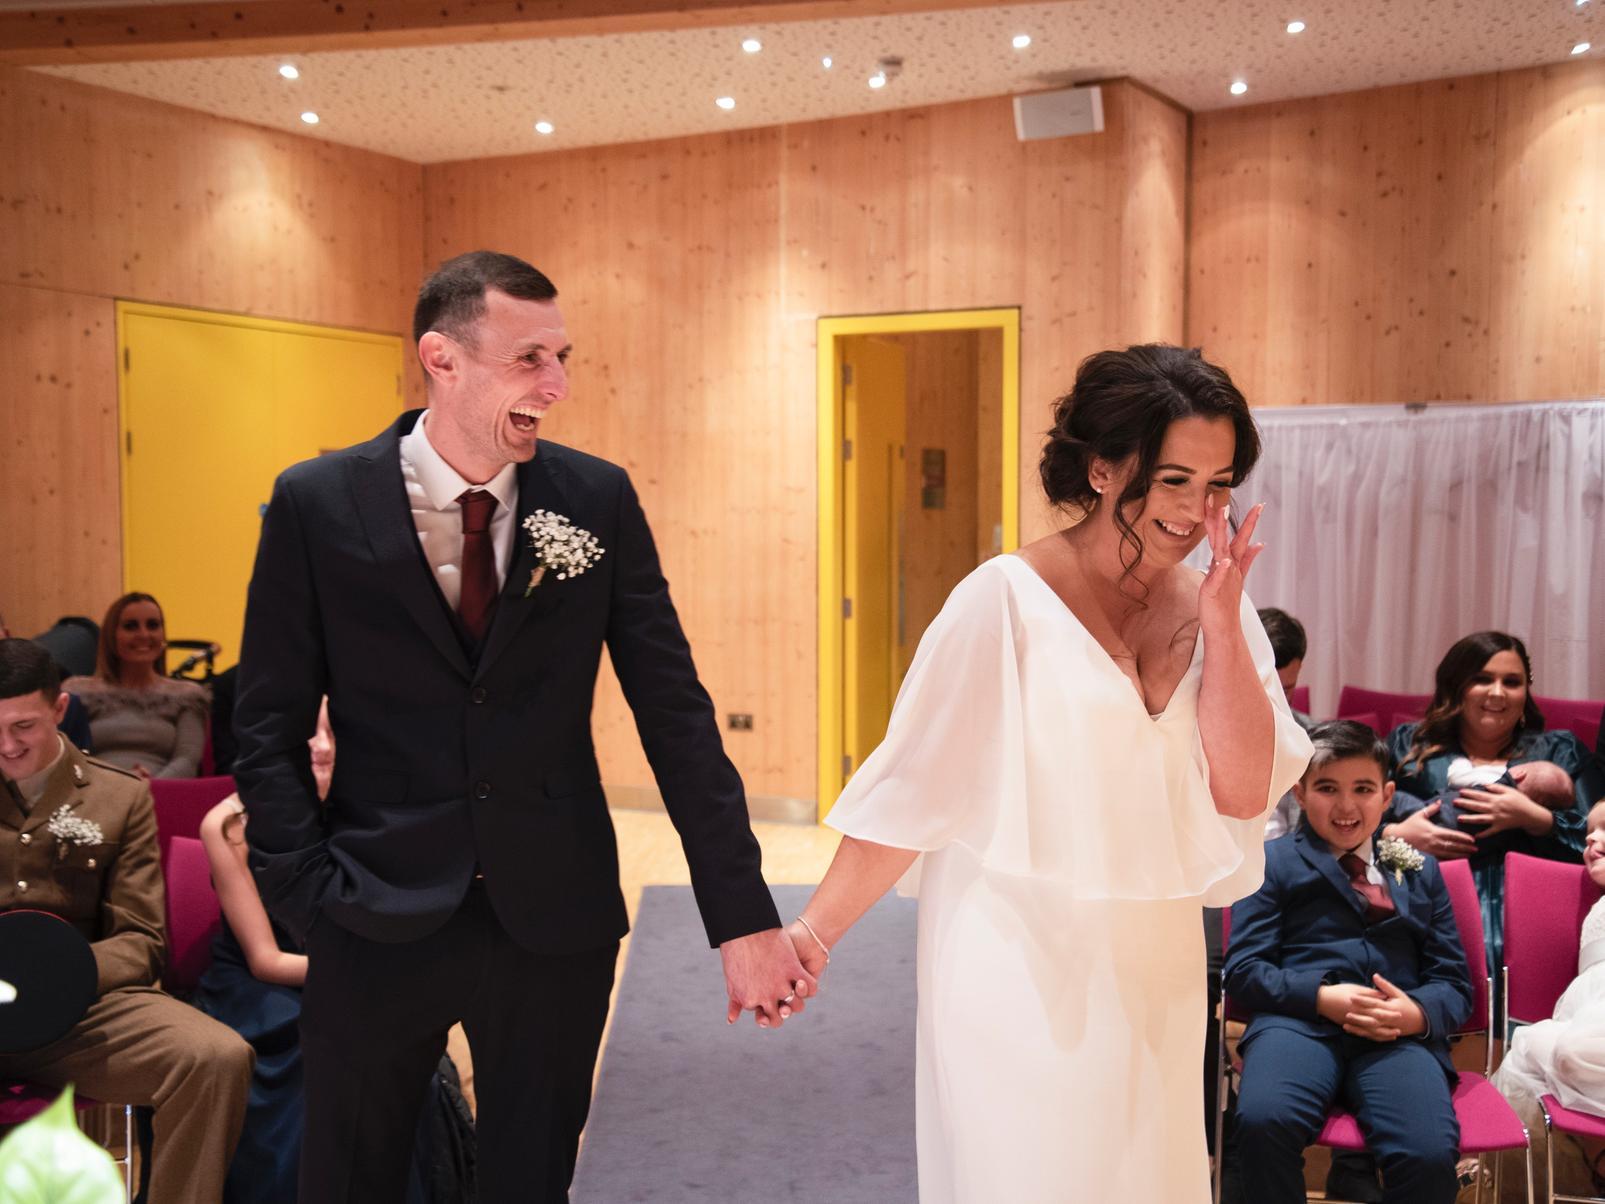 Stephen Hampton and Gemma Hogg chose The Wedding Chapel in Blackpool for their marriage ceremony